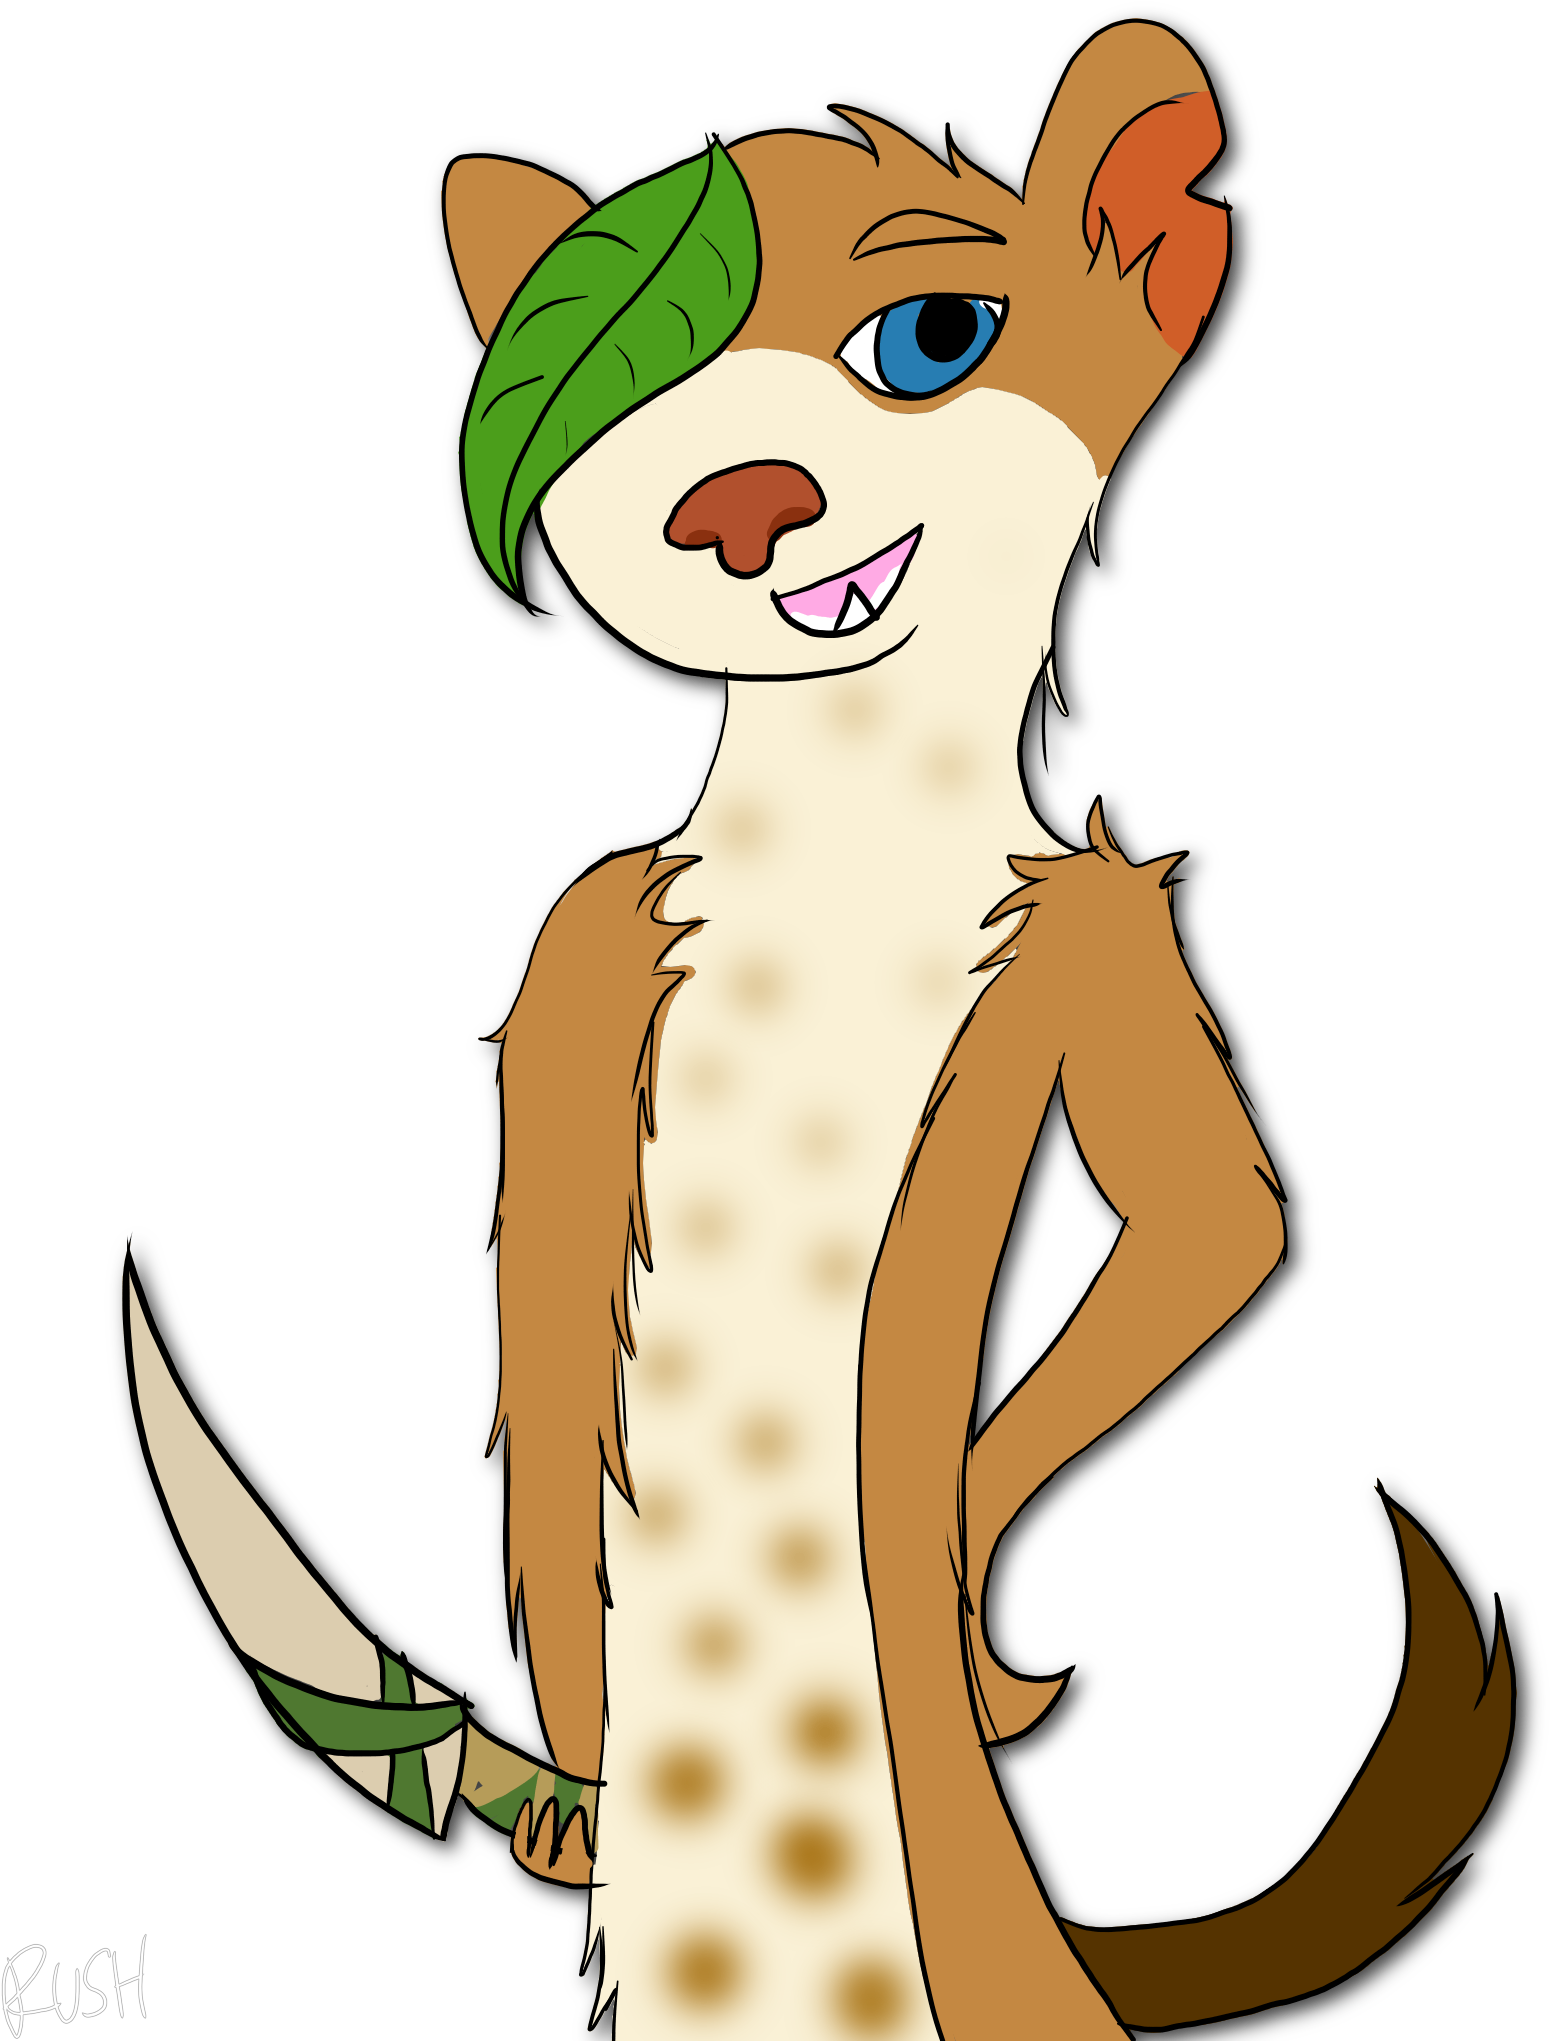 Daisies-sunshine 16 7 Buck The Sexy Weasel By Reallytrulyrush - 2017 (1704x2183)